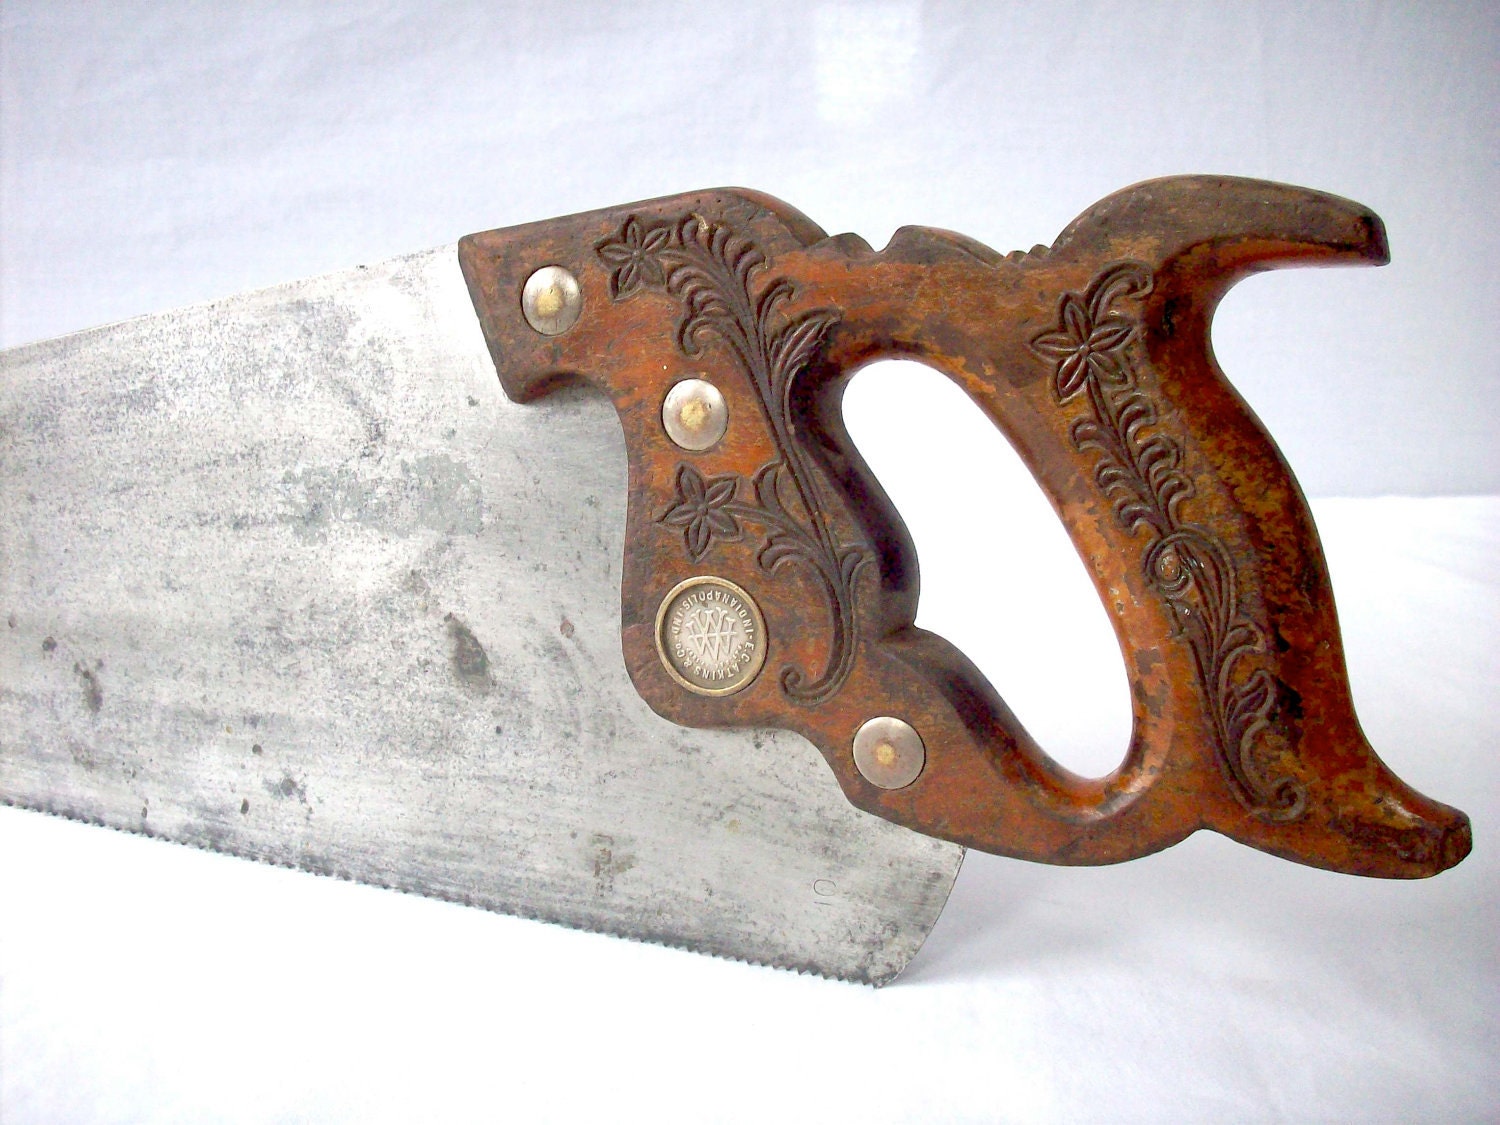  www.etsy.com/listing/92571527/vintage-horned-hand-saw-ec-atkins-and-co